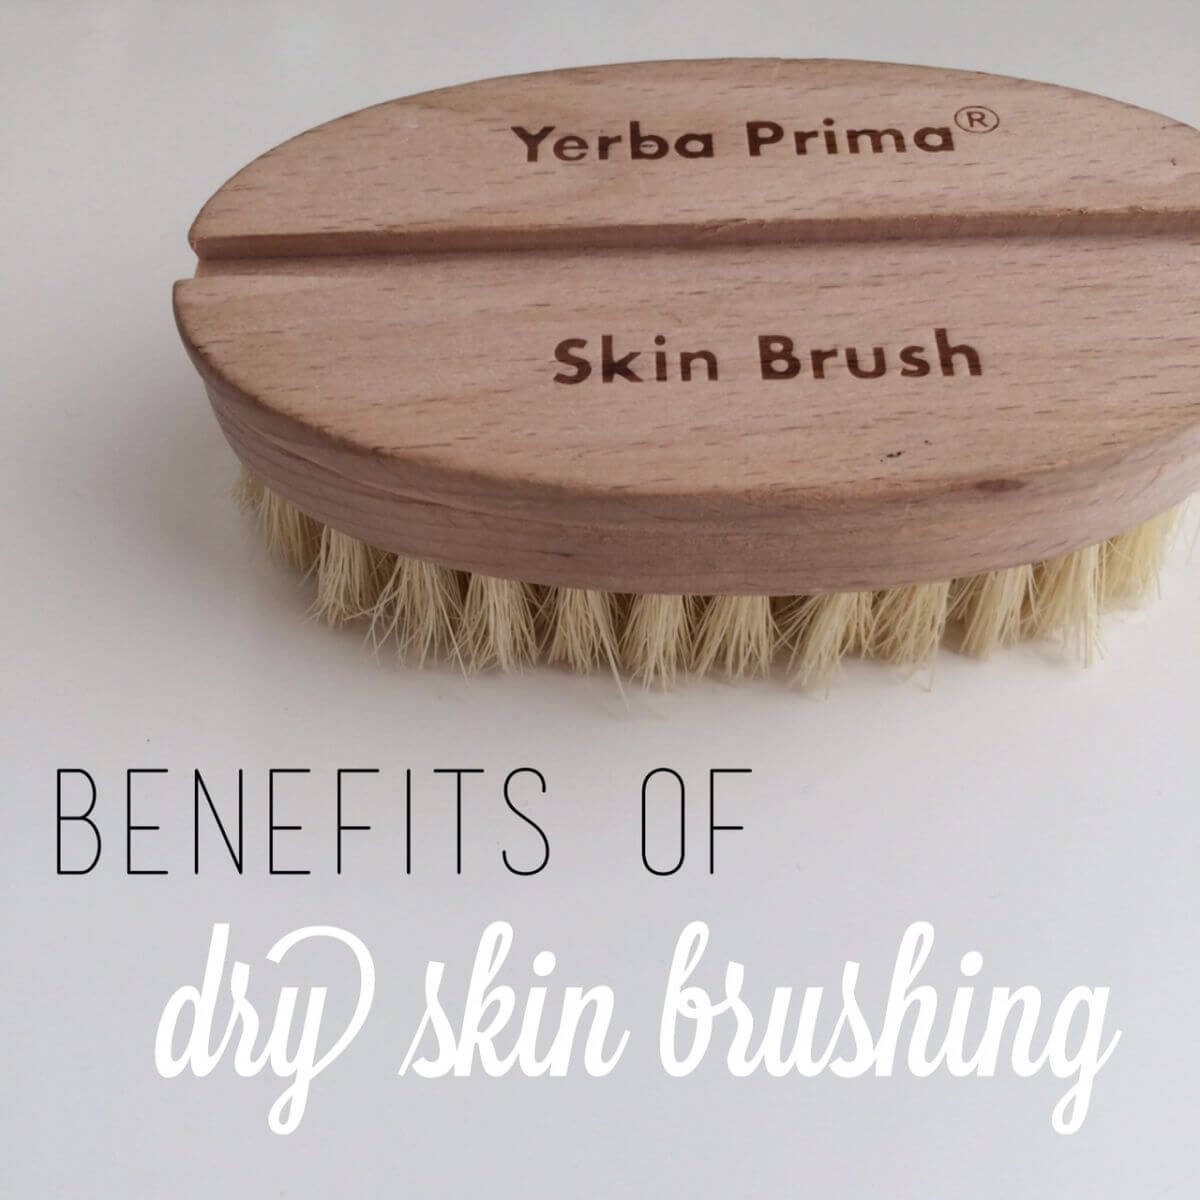 How To Dry Brush Your Body & What Are The Benefits